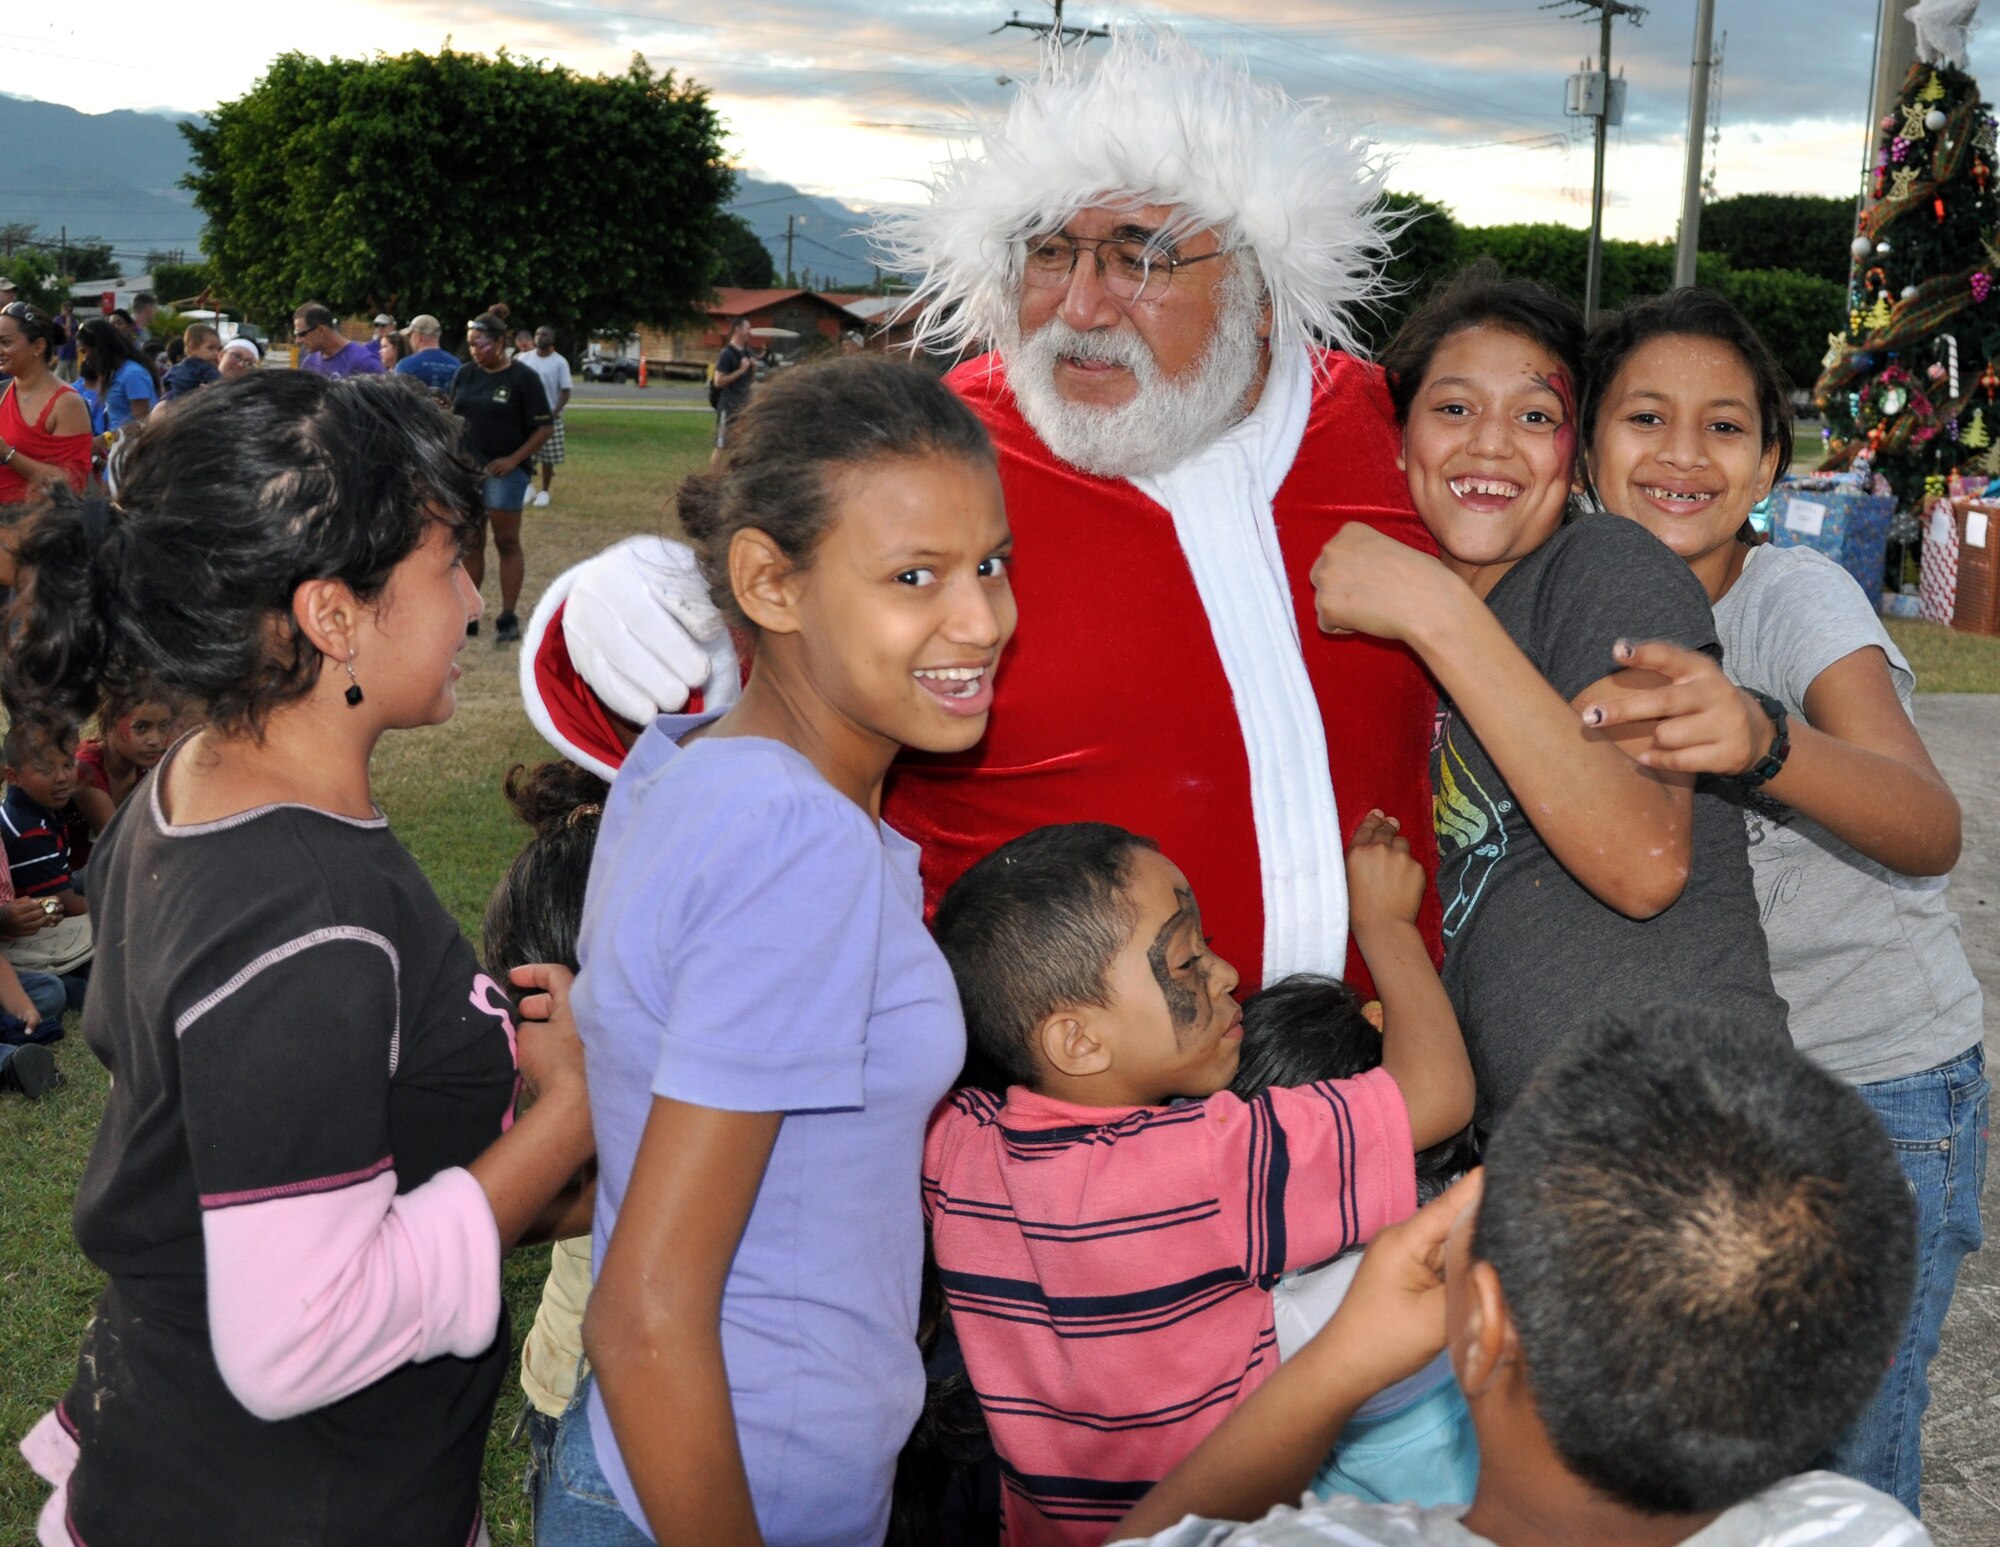 Honduran orphans greet Santa Claus during Joint Task Force-Bravo's "Operation Holiday Blessing," at Soto Cano Air Base, Honduras, Dec. 6, 2013.  More than 300 Honduran orphans were treated to a day of activities, gifts, and holiday joy, provided by more than 200 volunteers from the Task Force.  (U.S. Air Force photo by Capt. Zach Anderson)